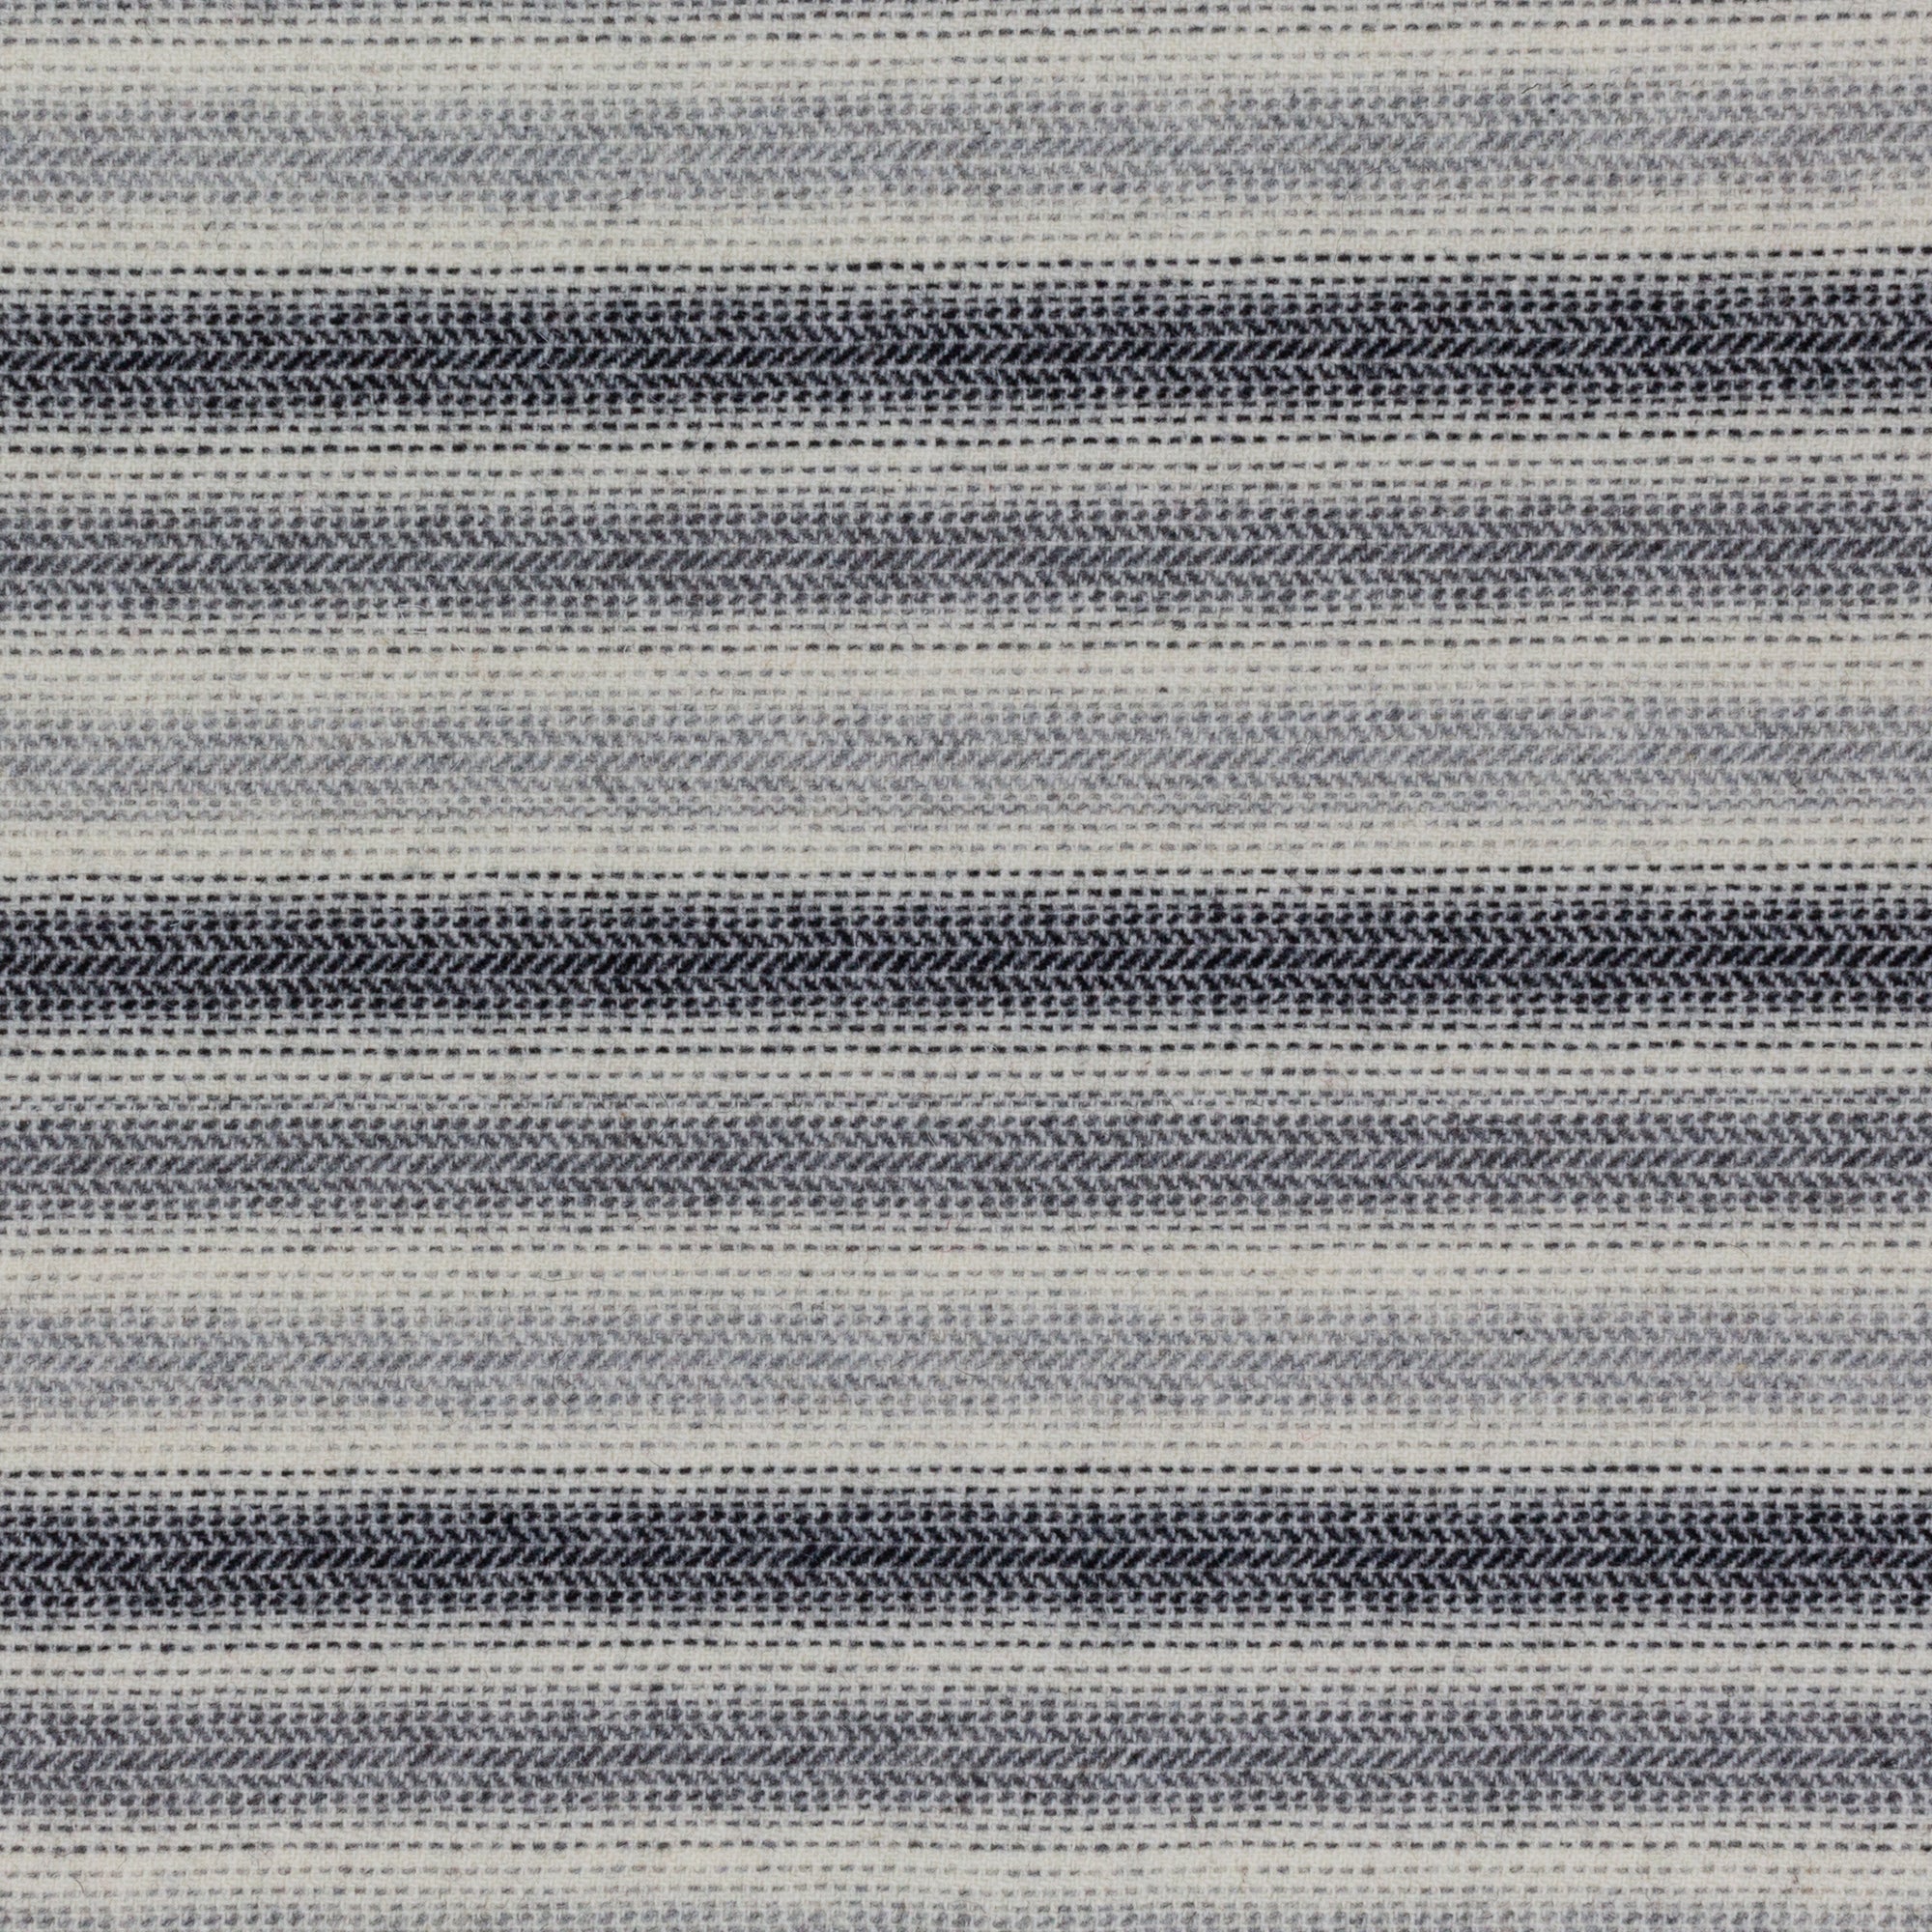 Grey and Black Ombre Wool Fabric or Strips - Off Bolt